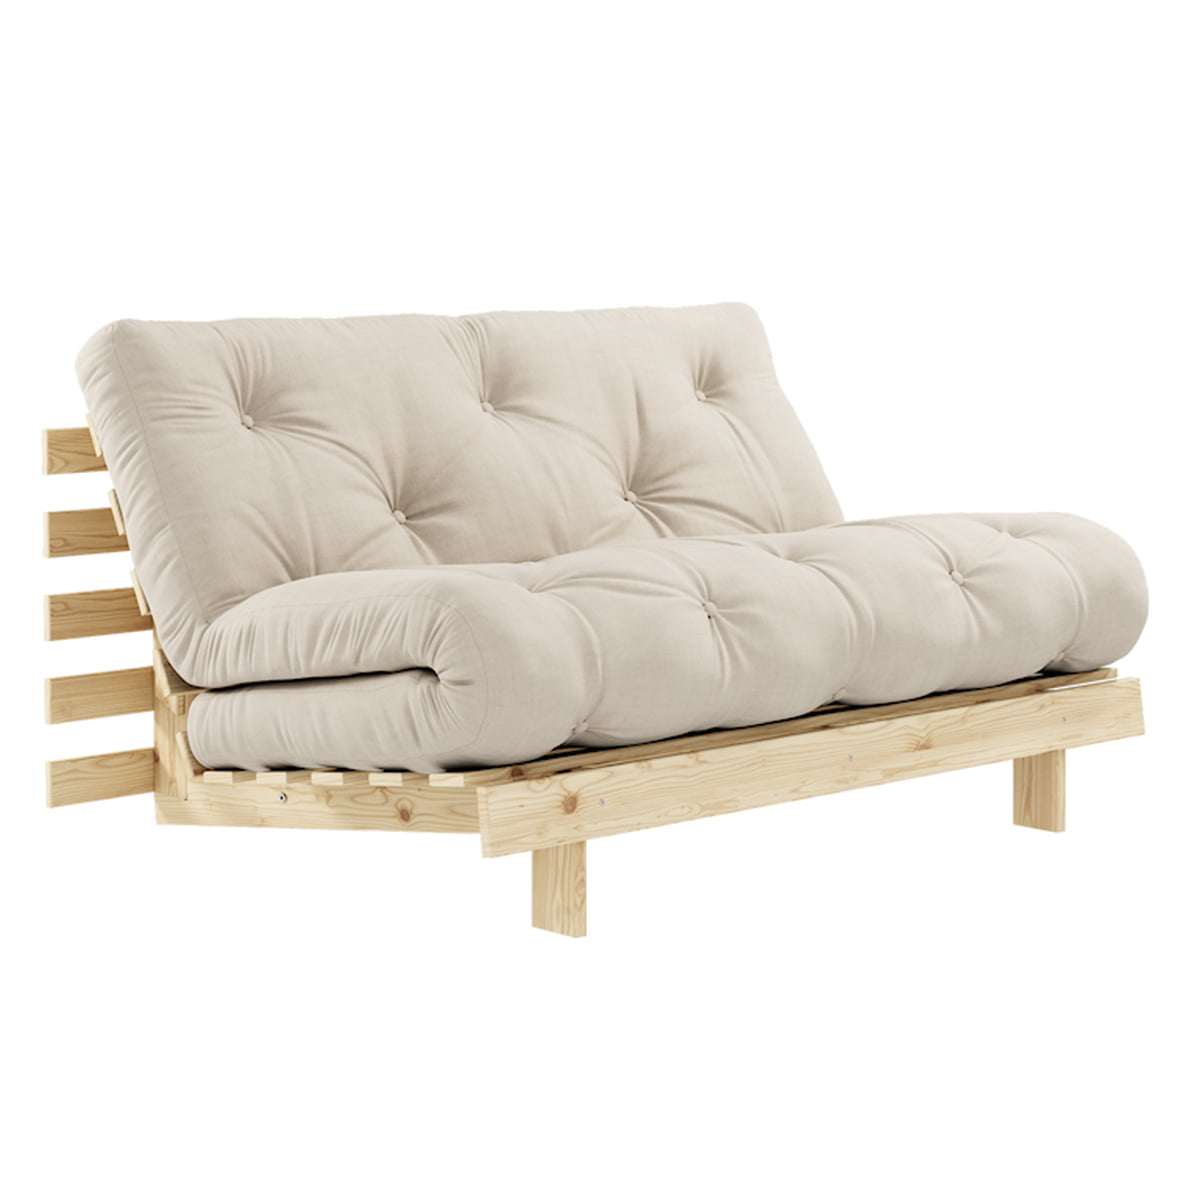 Check our blog - What's The Difference Between A Futon & Sofa Bed?